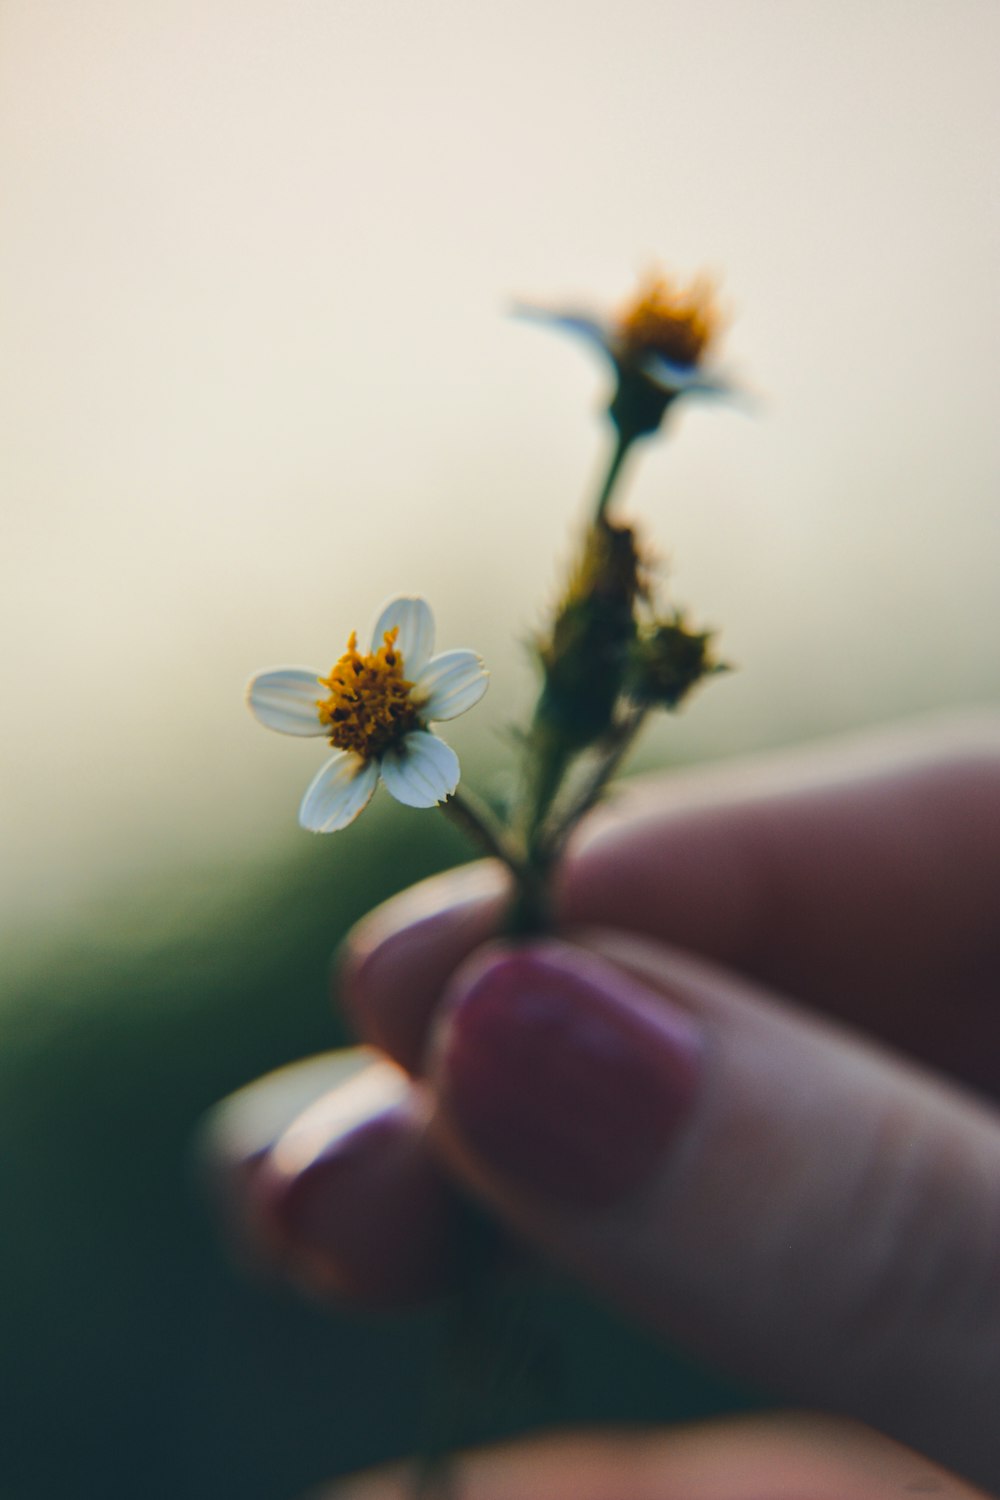 a person holding a small flower in their hand